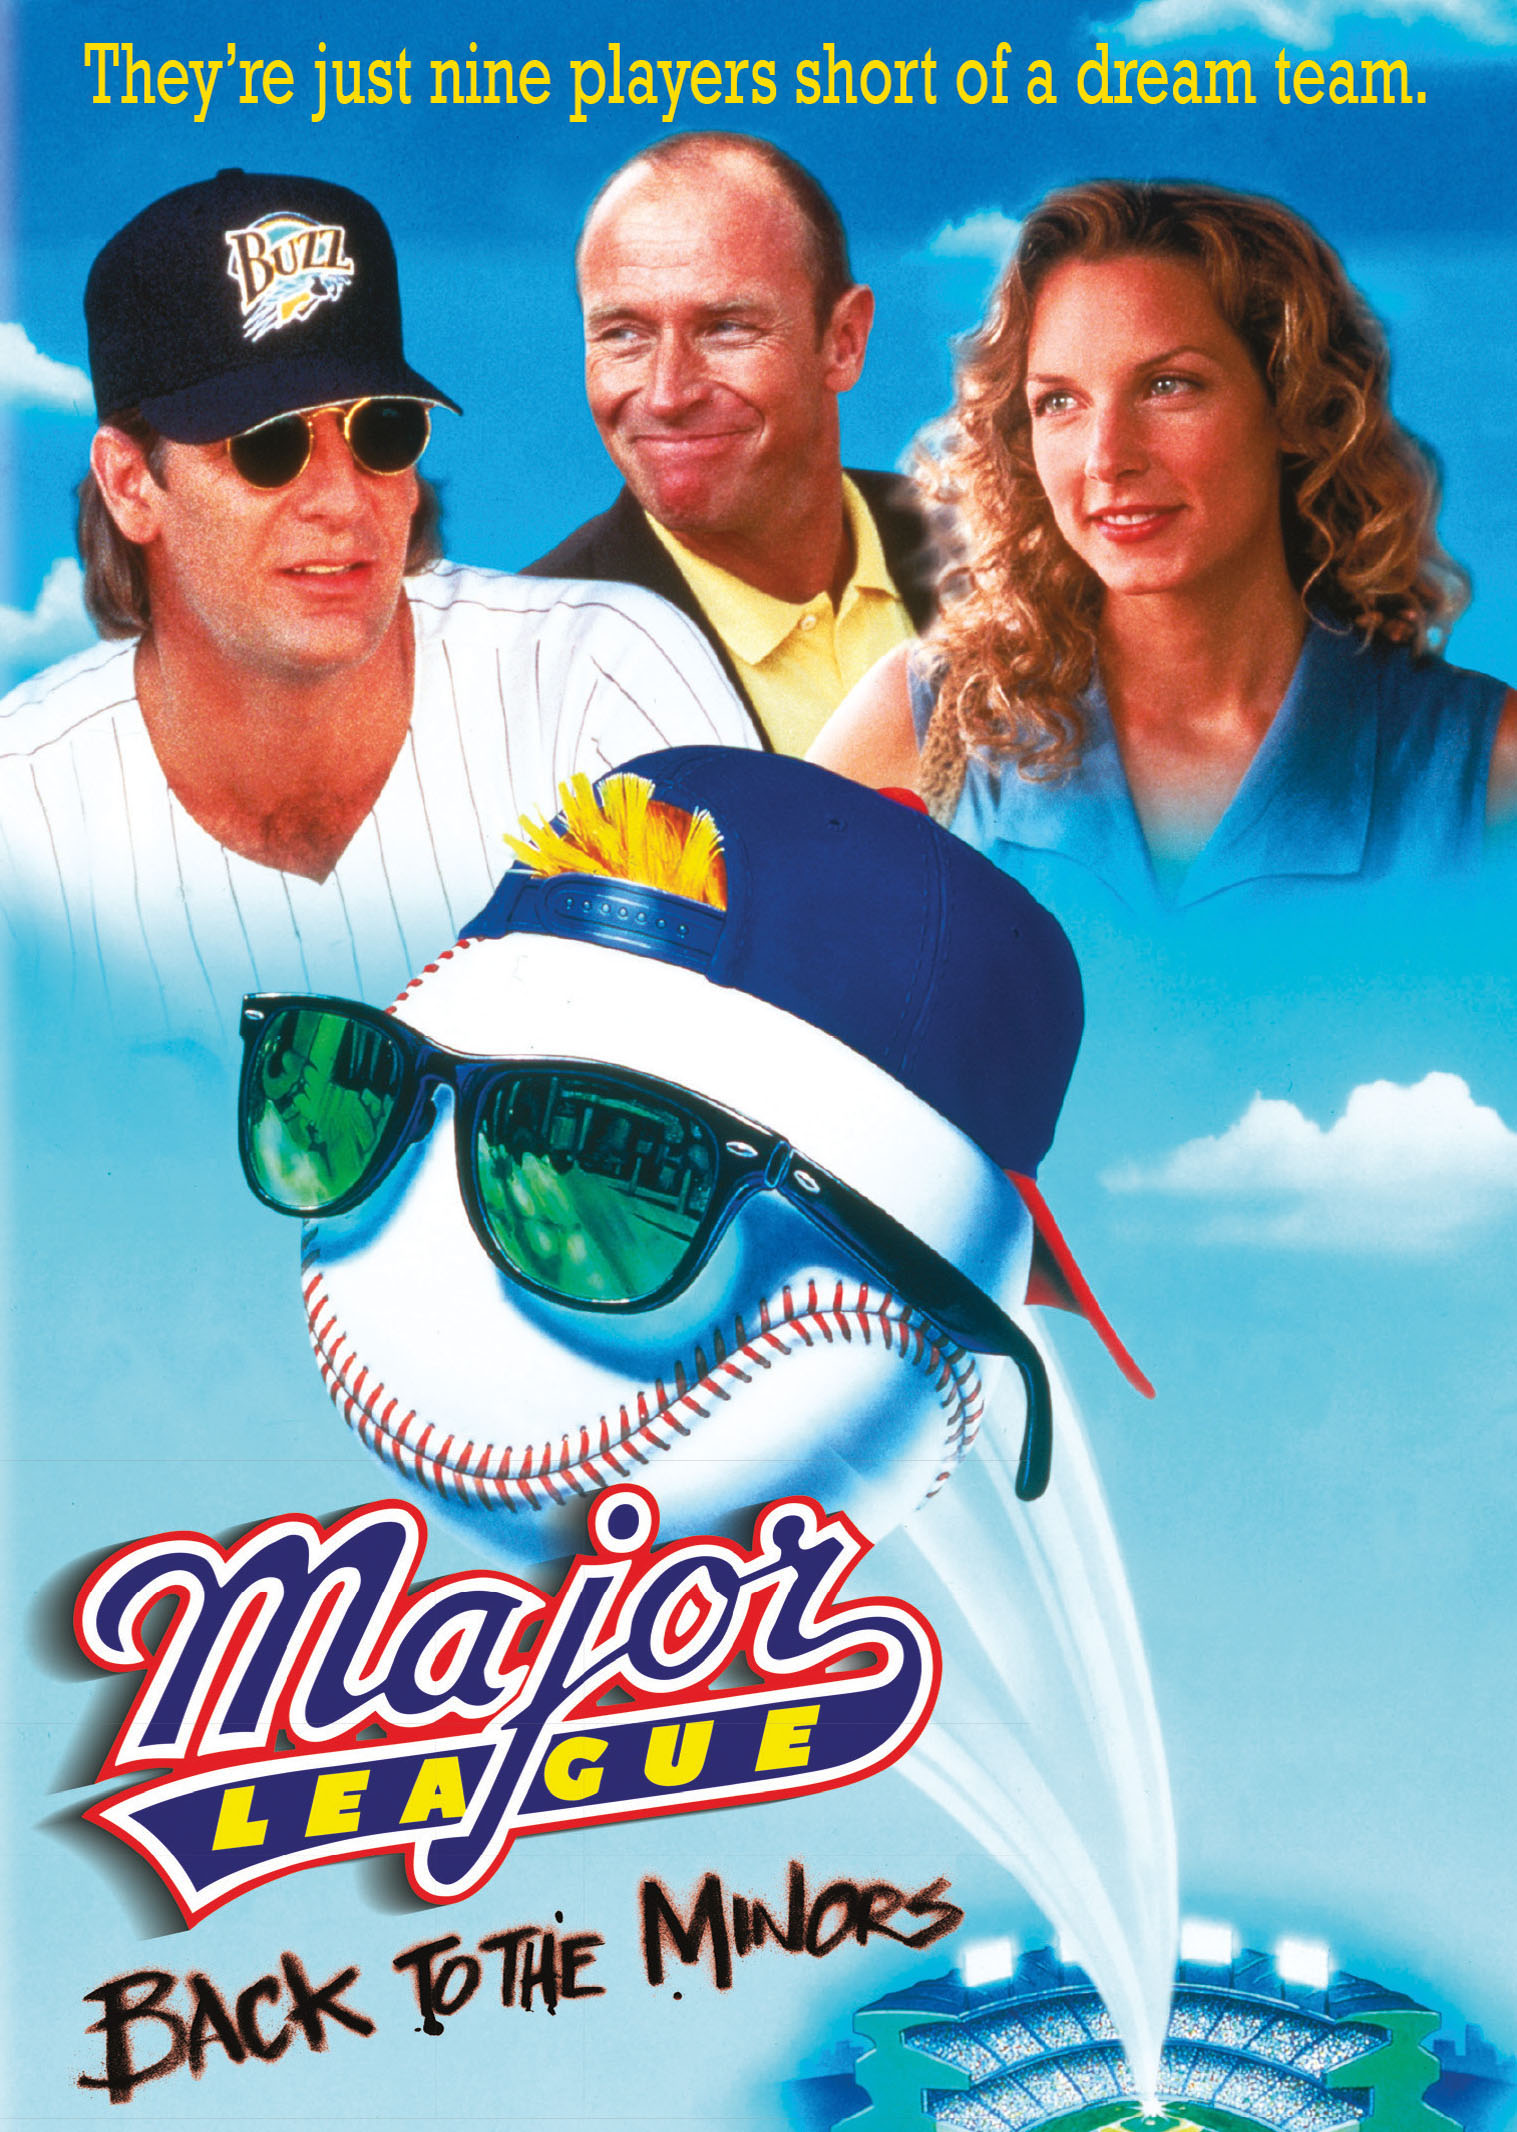 Major League: Back To The Minors [DVD] [1998] - Best Buy